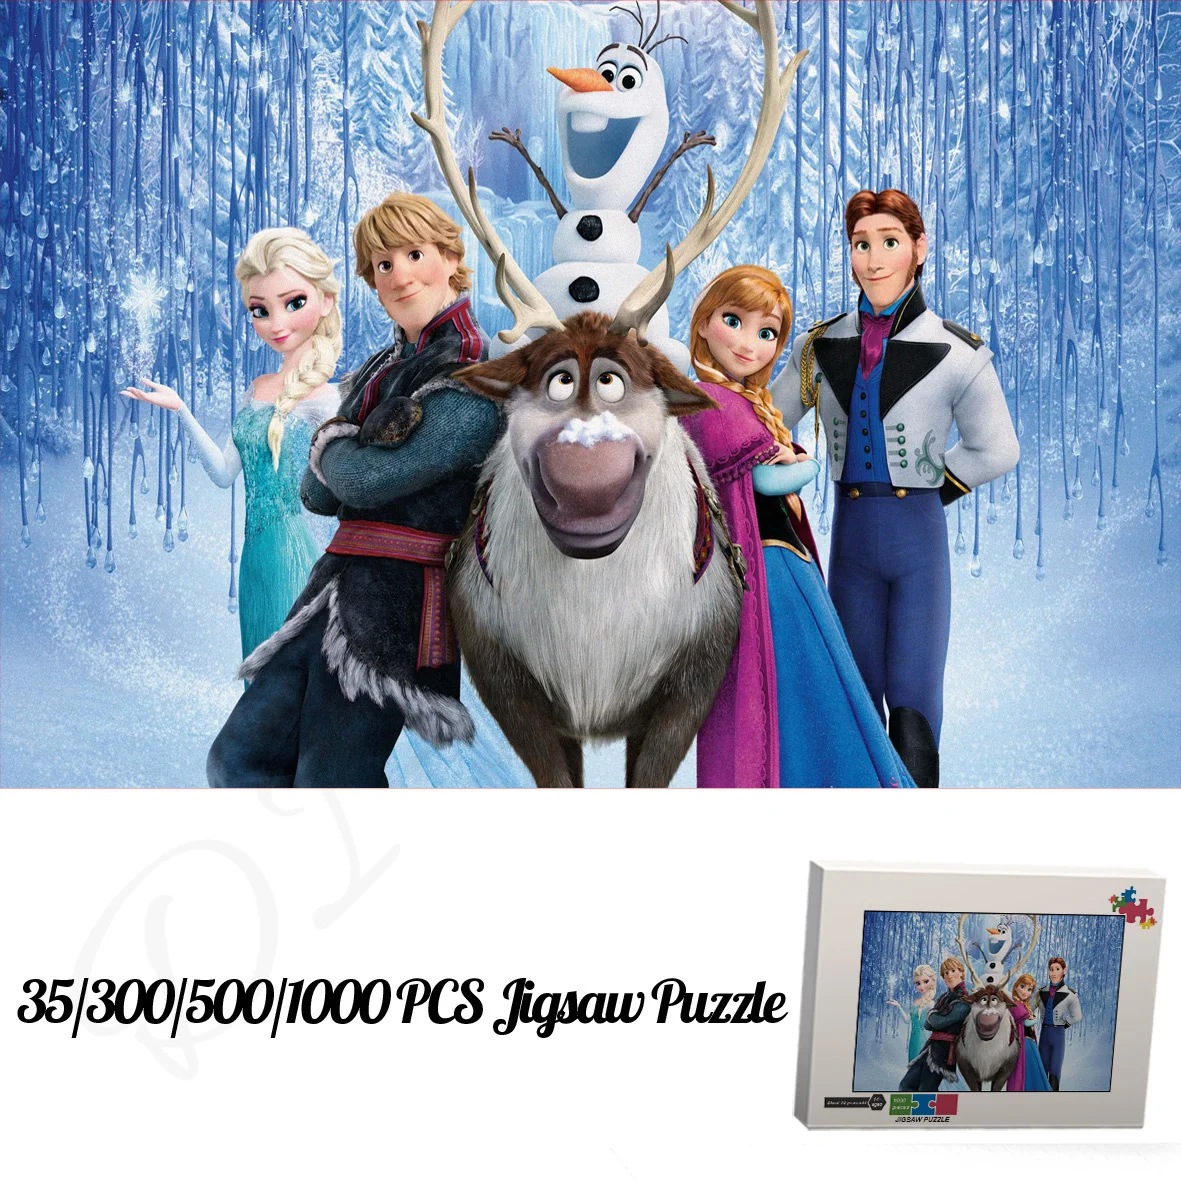 

Frozen Full Characters Puzzles Classic Cartoon Animation 35 300 500 1000 Pieces of Wooden Jigsaw Puzzles for Kids and Adults